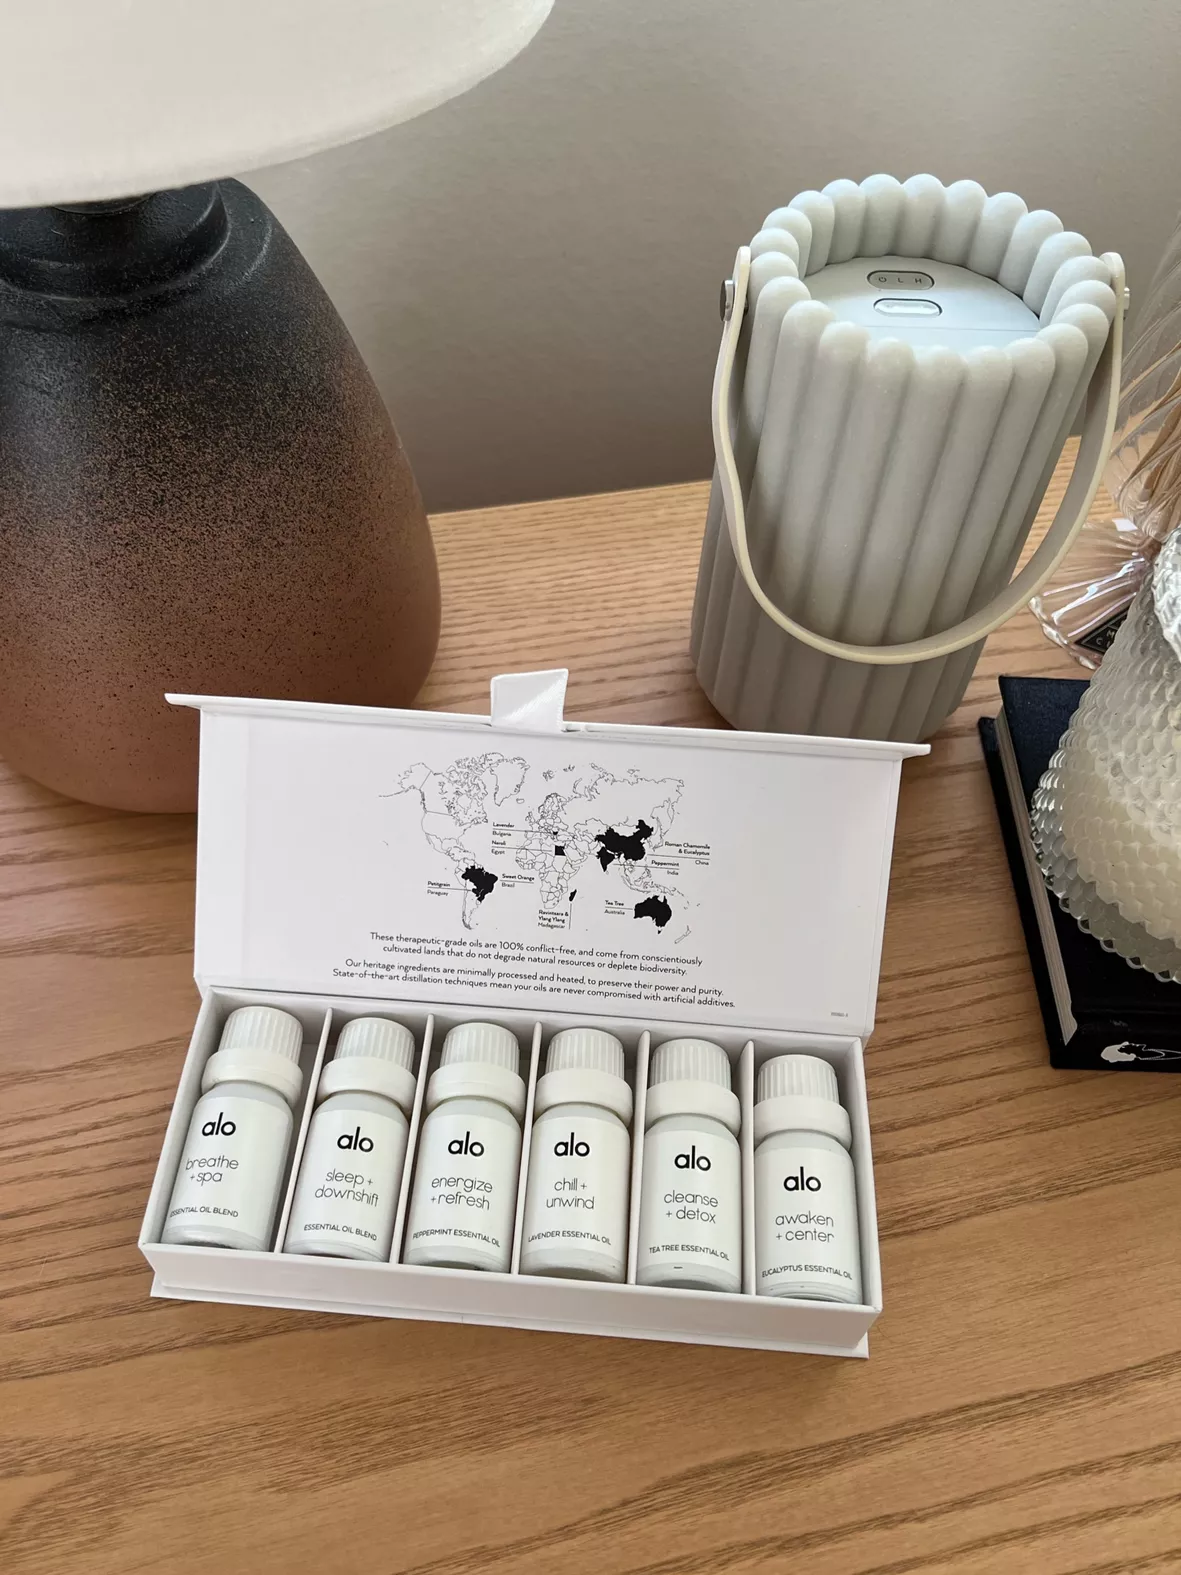 Curated Essential Oil Sets – TenLeaves